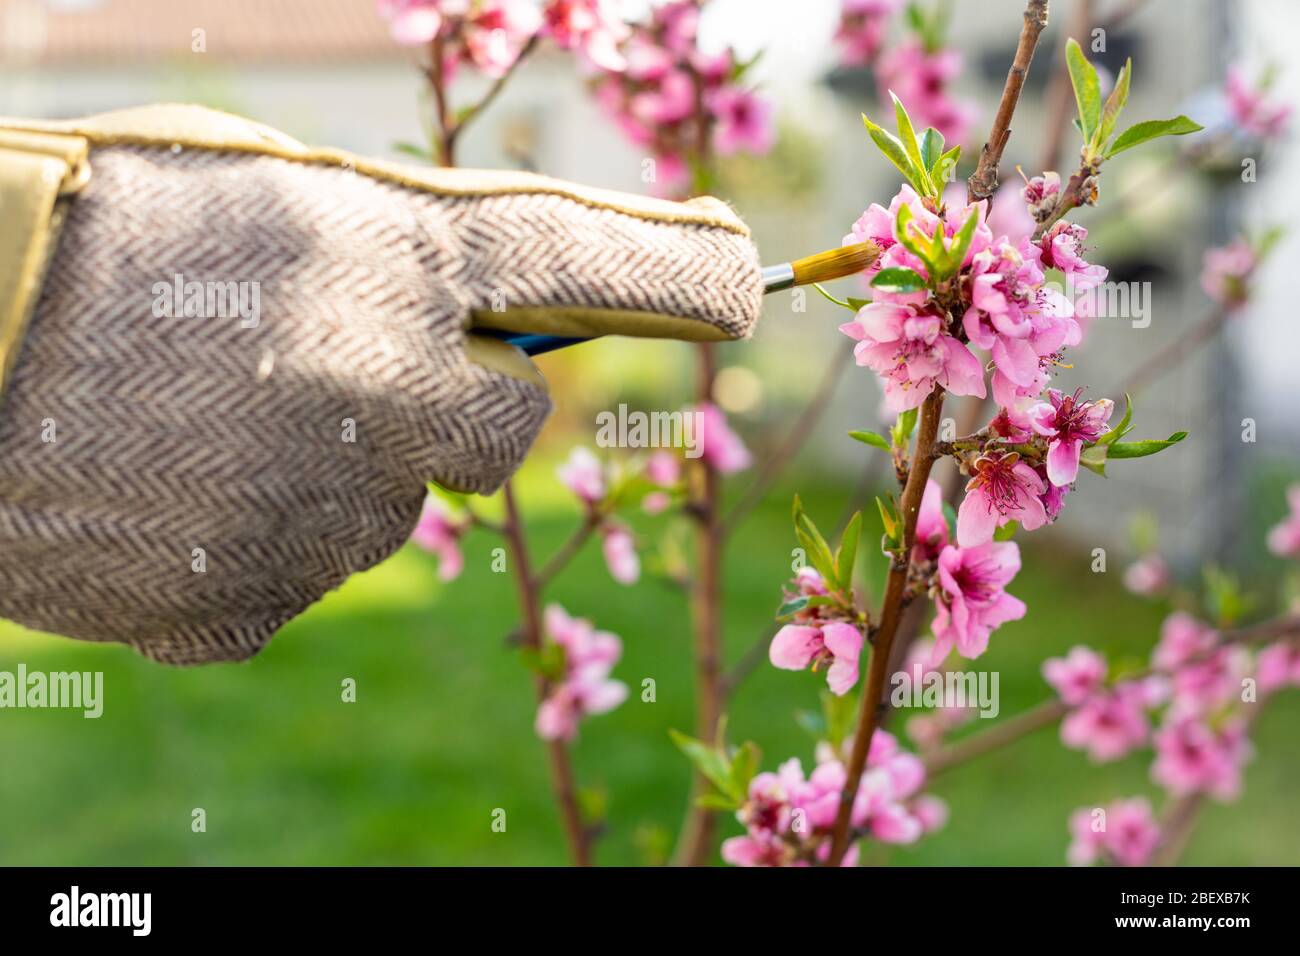 Hand of a gardener in gardening glove artificially pollinates fruit blossoms with an artist's brush Stock Photo